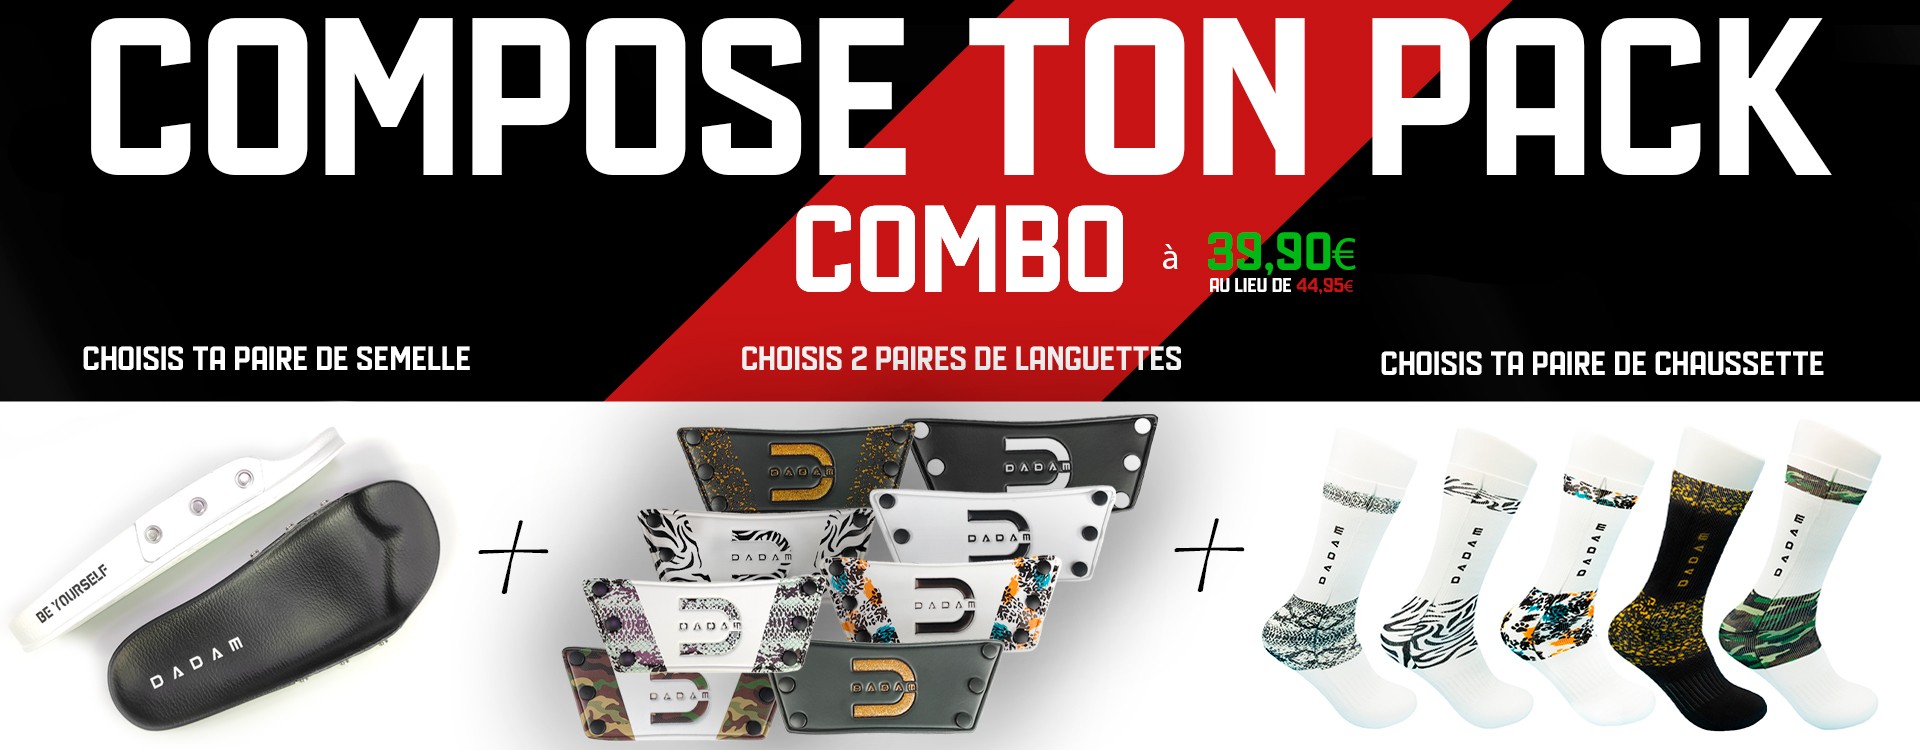 COMPOSE TON PACK COMBO